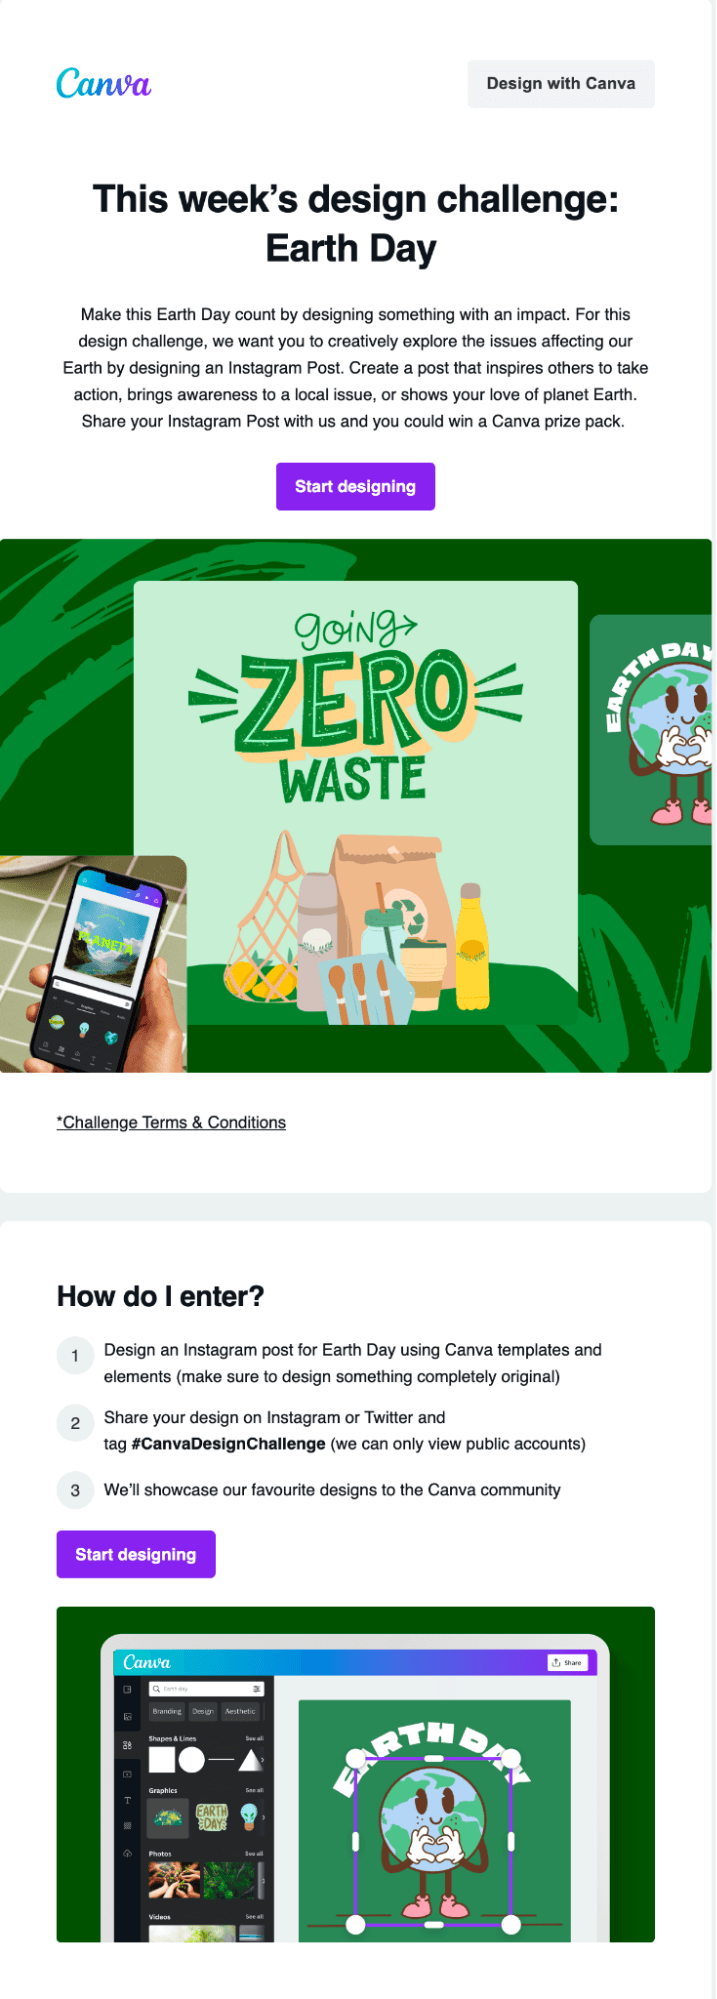 Email Engagement Content Ideas: Screenshot of Canva's email for their Earth Day challenge